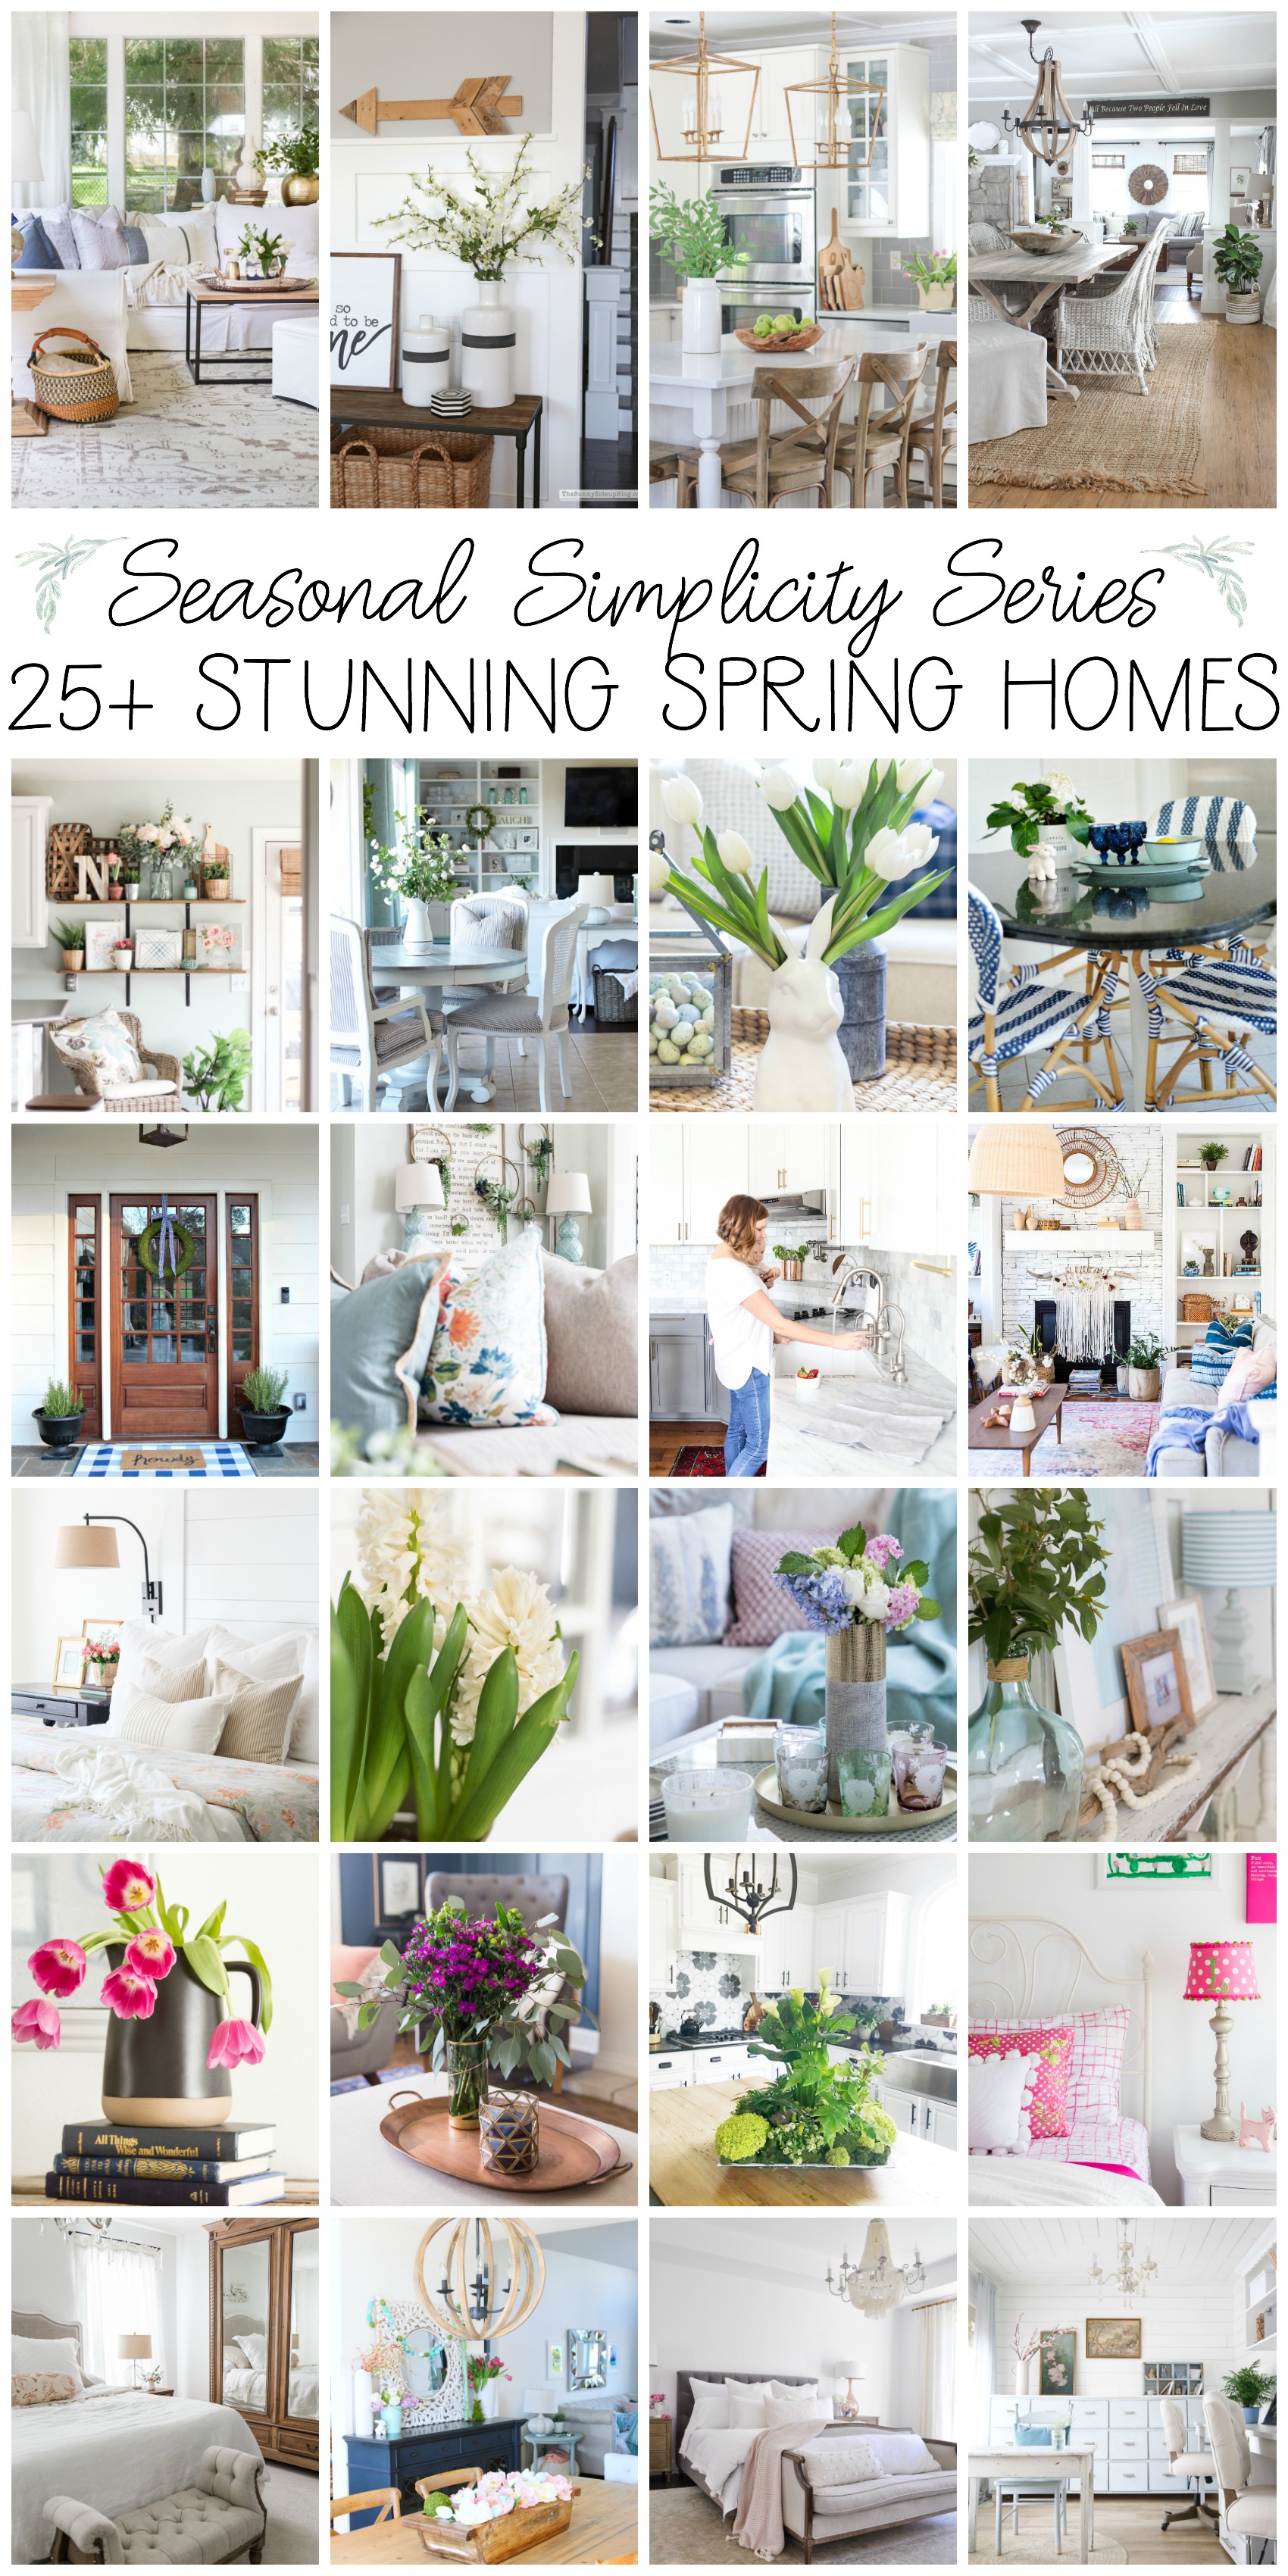 25+ stunning spring homes poster.